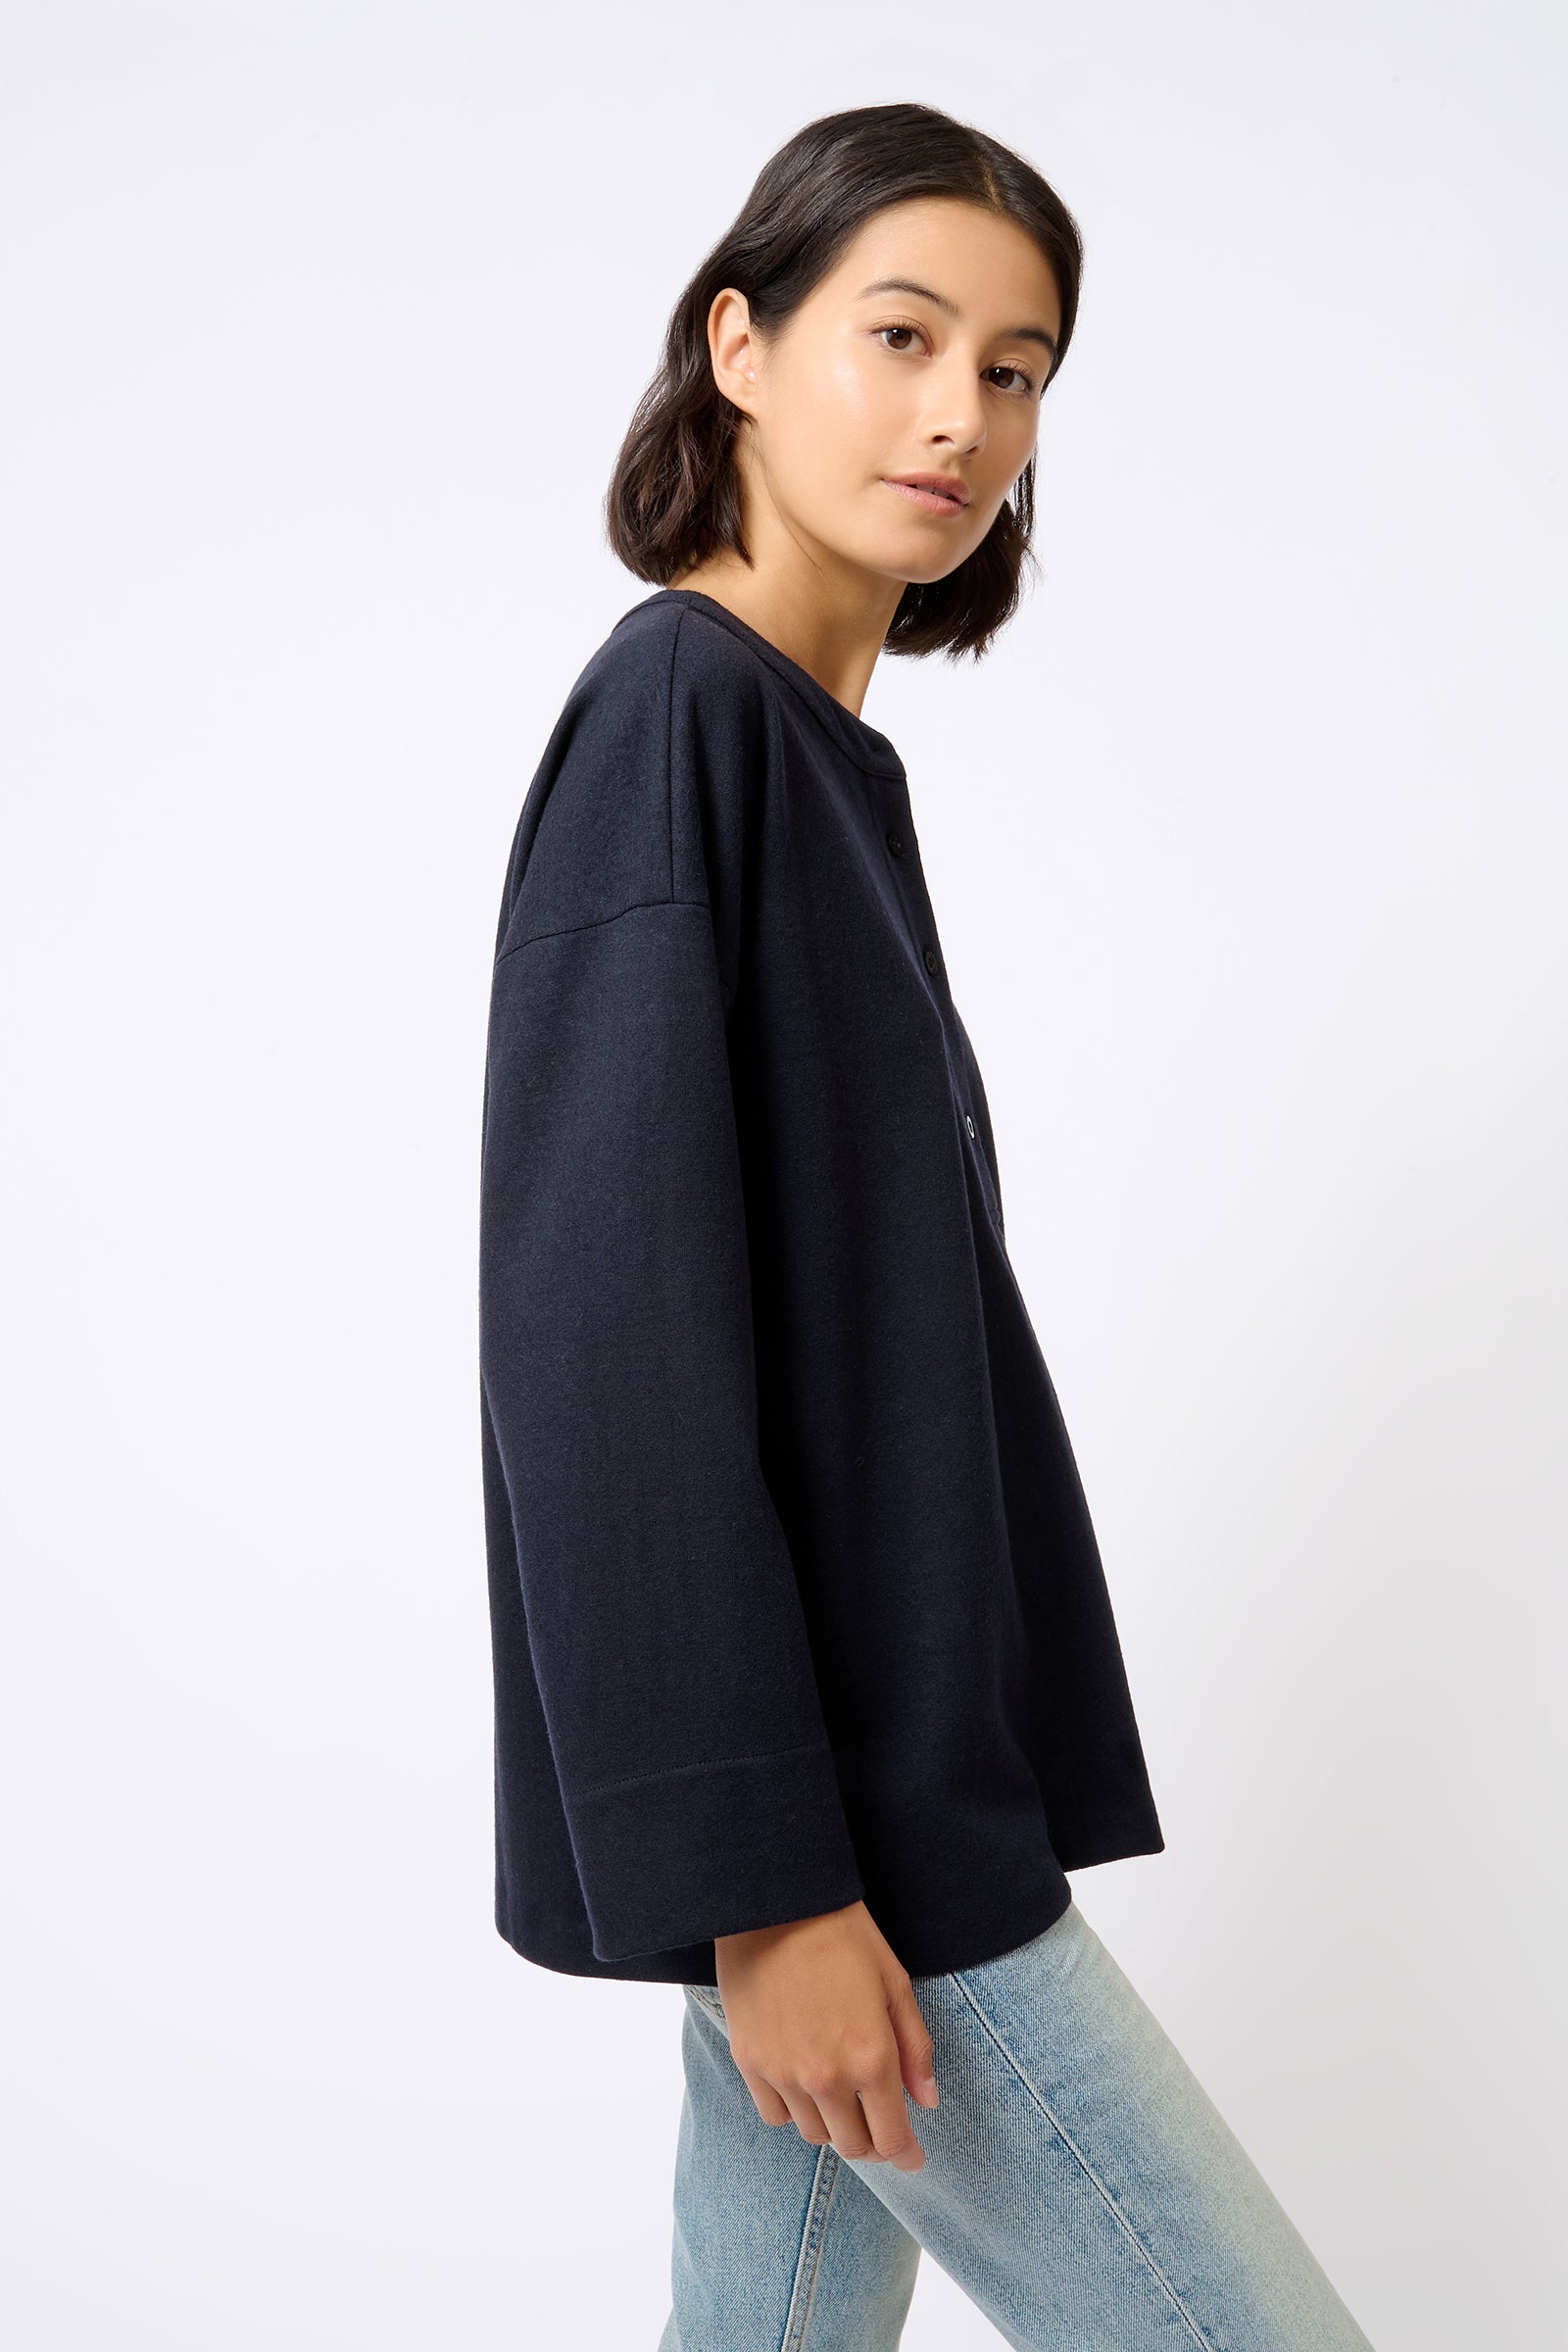 Band Collar Top in Midnight Italian Felted Jersey with Front Placket and  Pleat Detail – KAL RIEMAN